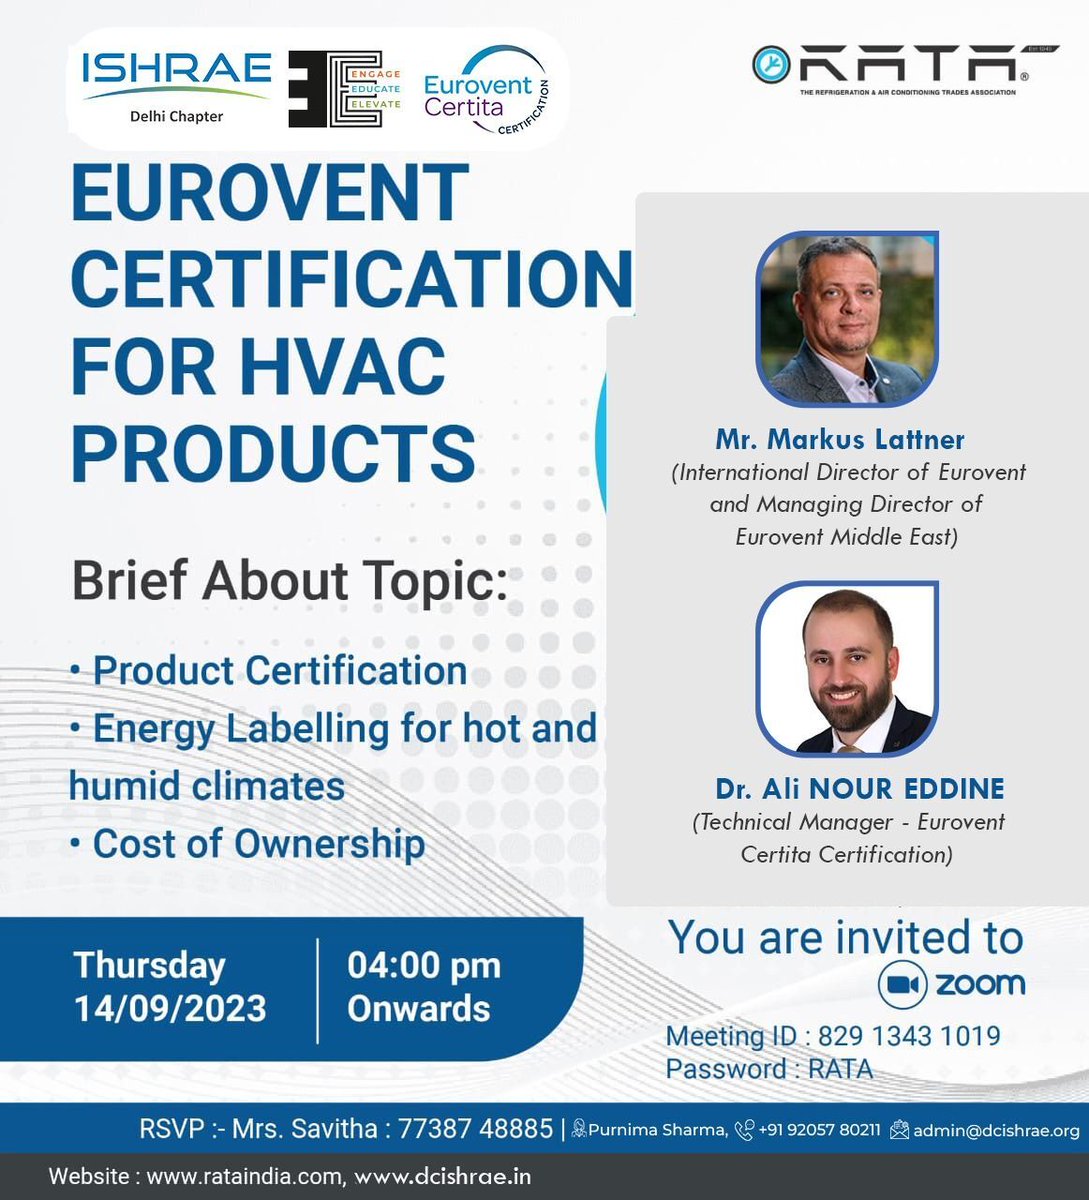 🌟 Join our HVAC Webinar! 🌟

Discover the impact of 'Eurovent Certification for HVAC Products'.

🗓️ Date: 14th Sept 2023
🕓 Time: 4:00 PM

📝 Register now 👉 bit.ly/3PeFeLD

Let's unlock HVAC excellence together! 💨
 #HVAC #Webinar #EuroventCertification